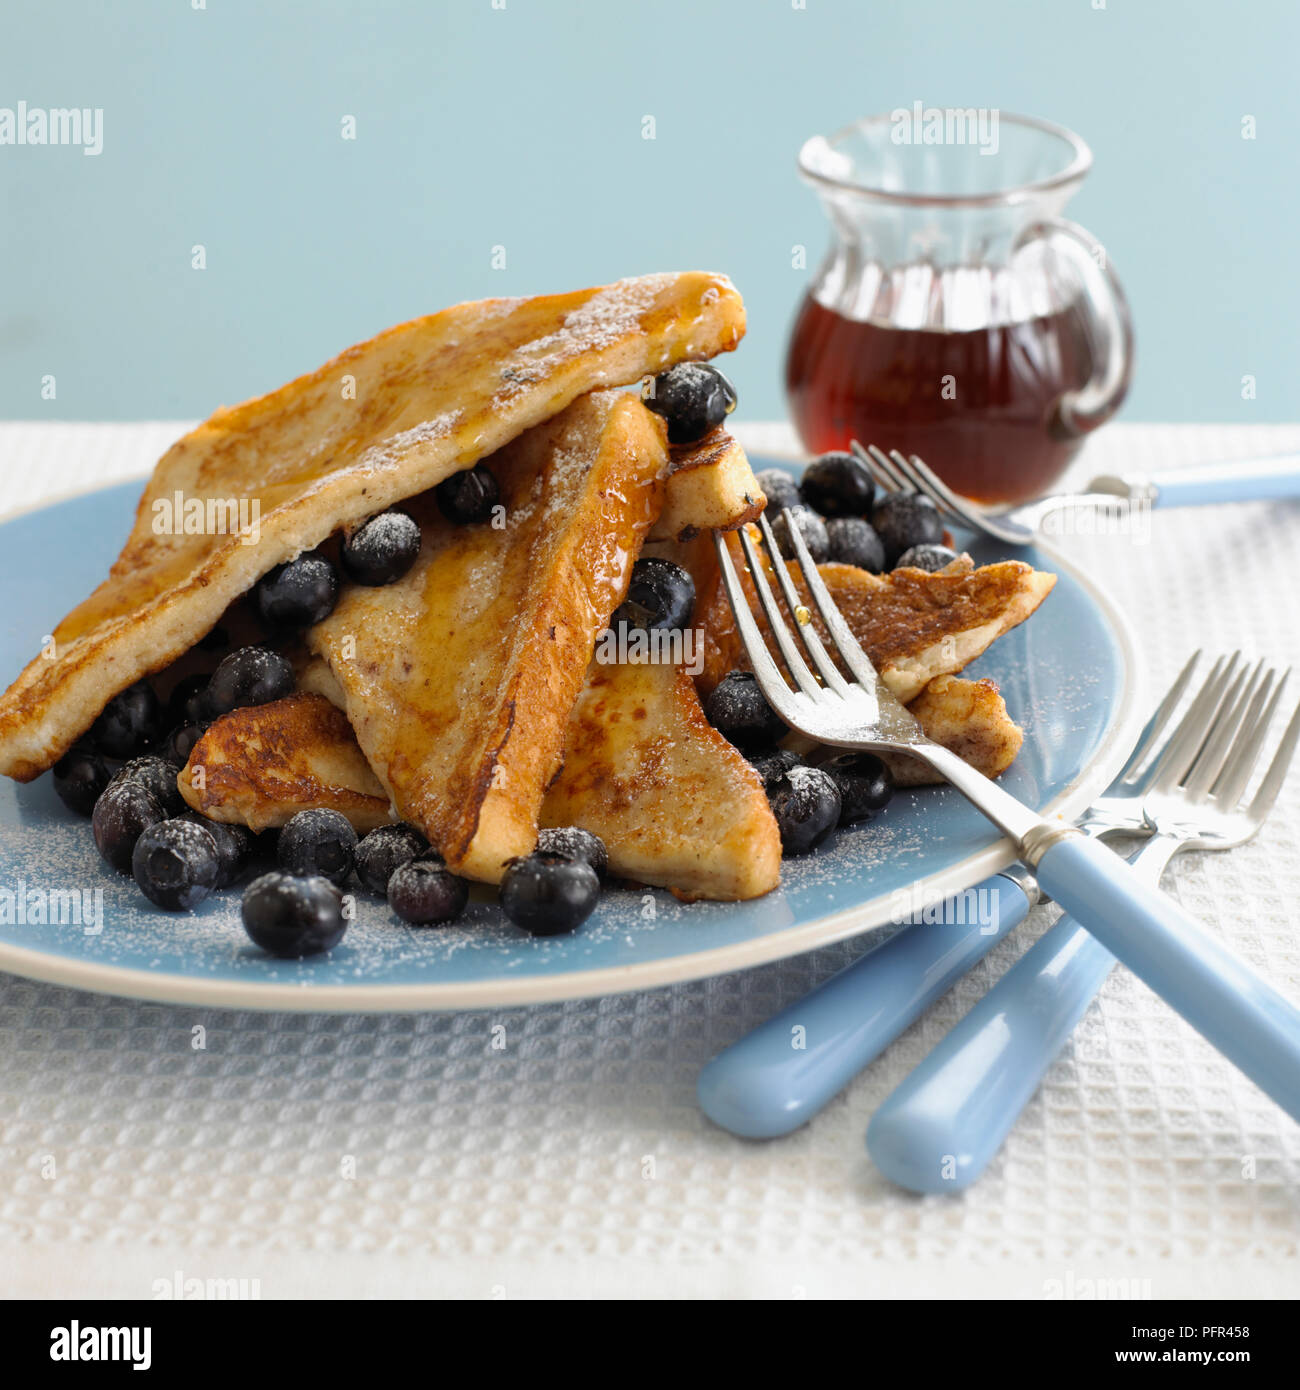 Plate of eggy bread, blueberries and syrup Stock Photo